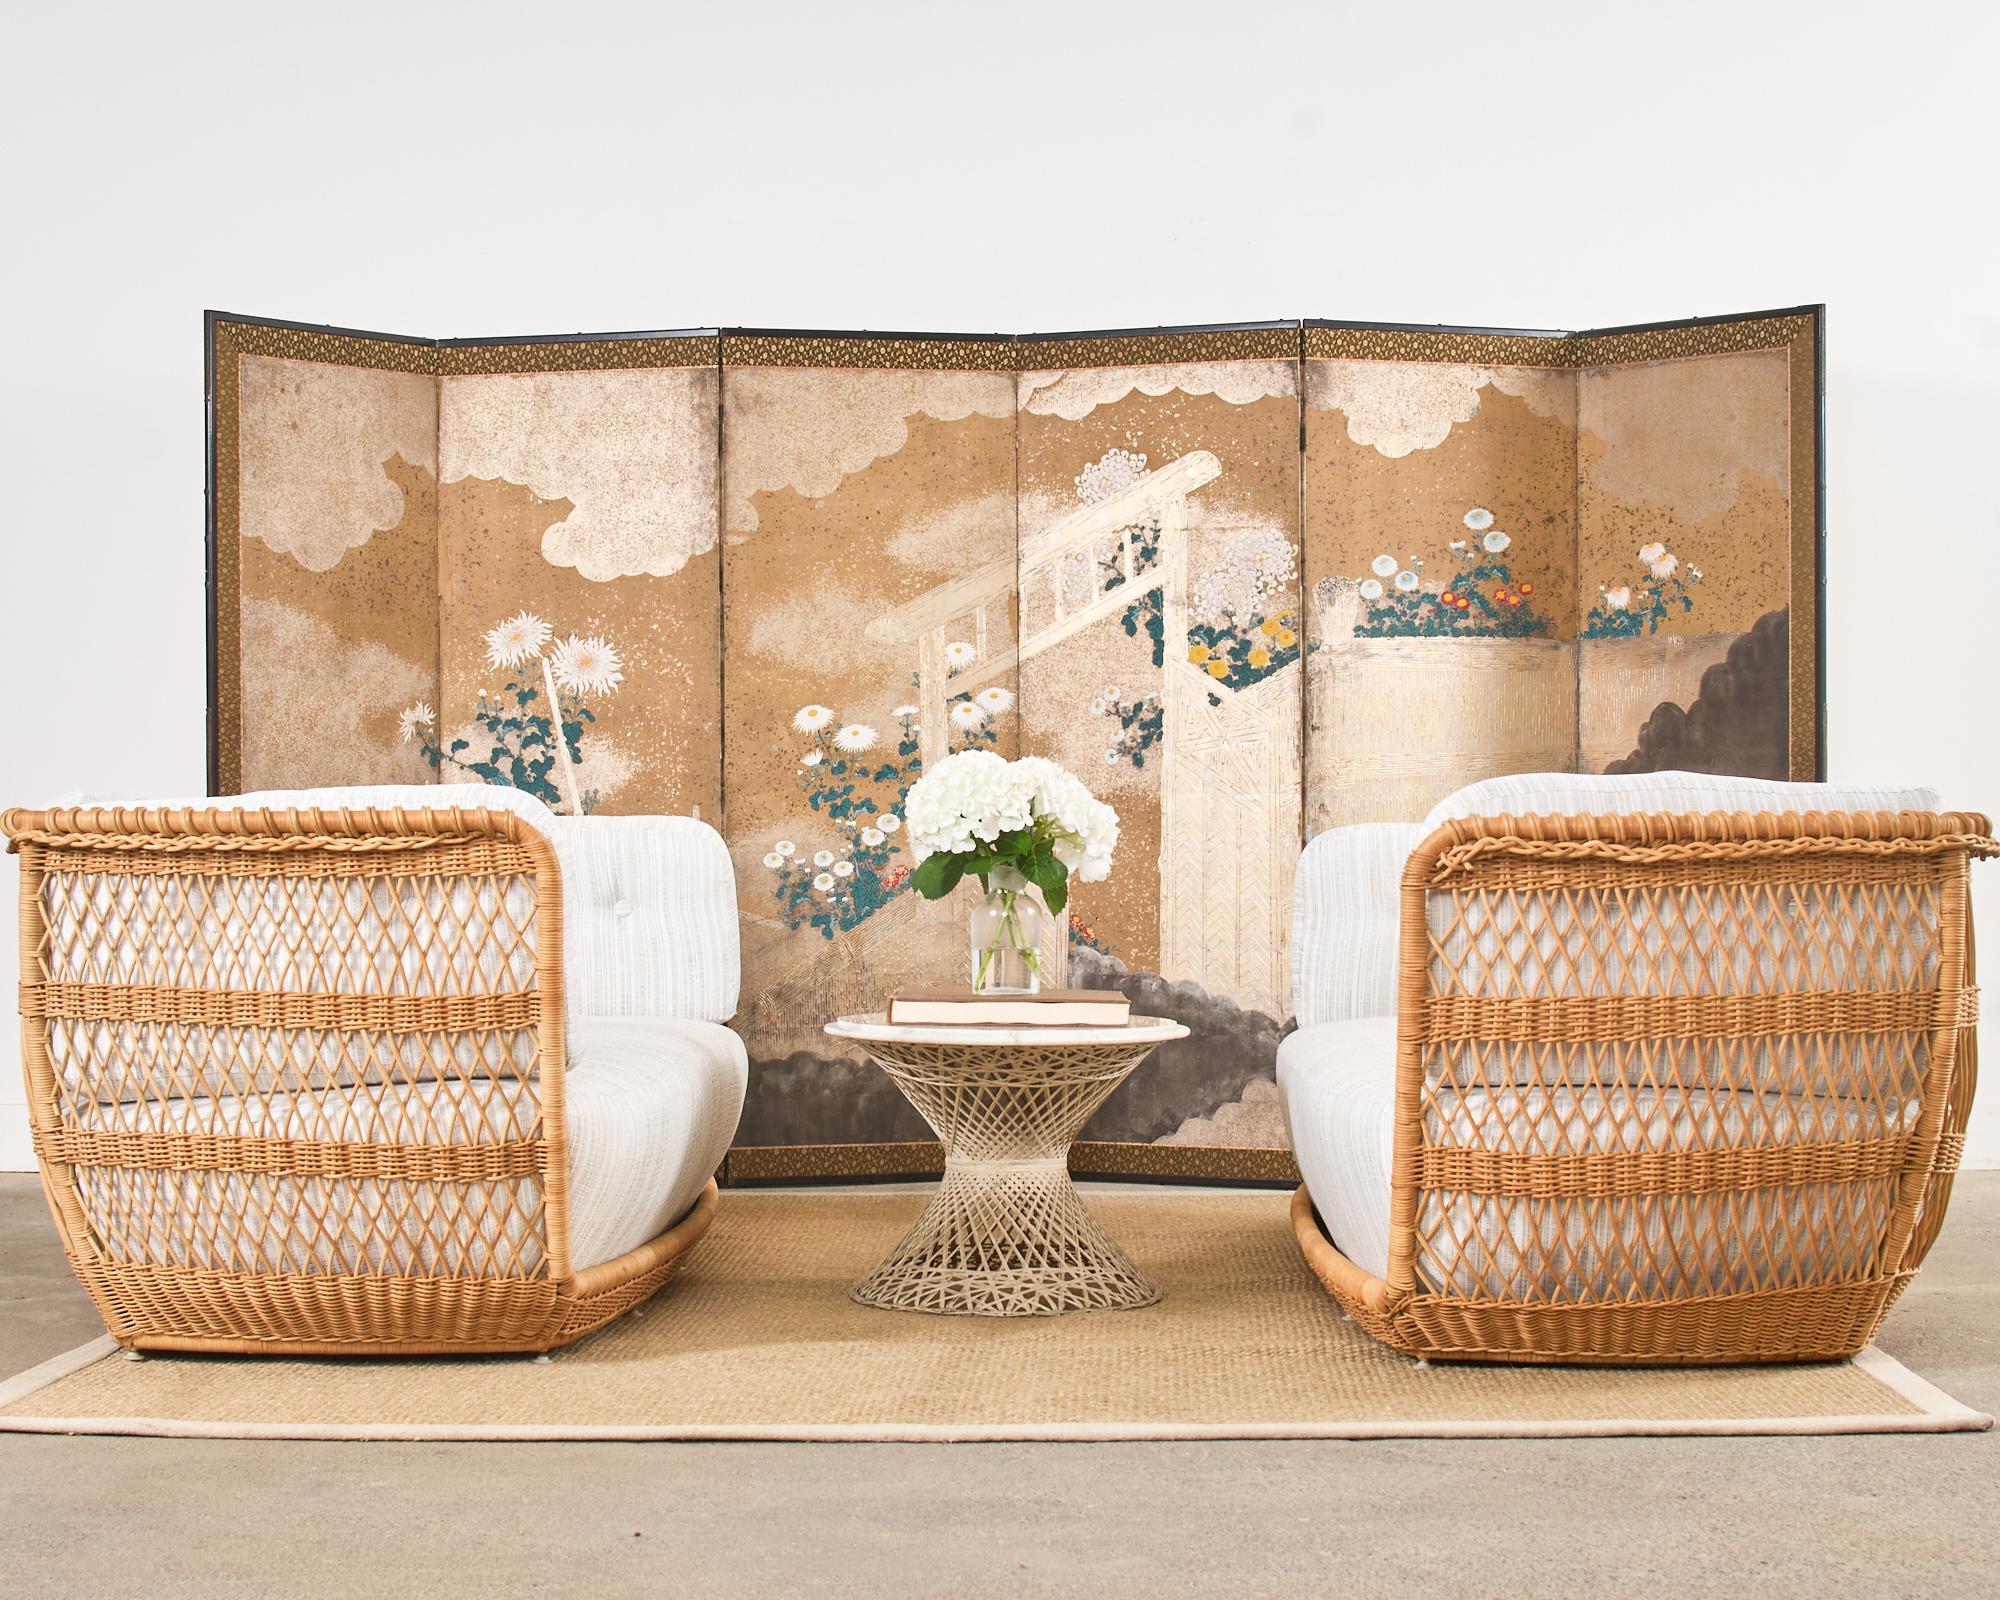 Fantastic pair of gracefully curved bulbous form sofa settees featuring iron frames covered with woven rattan, pencil reed, and wicker. The modern design basket or pea-pod shape of the settees touches on biomorphism while being grounded in natural